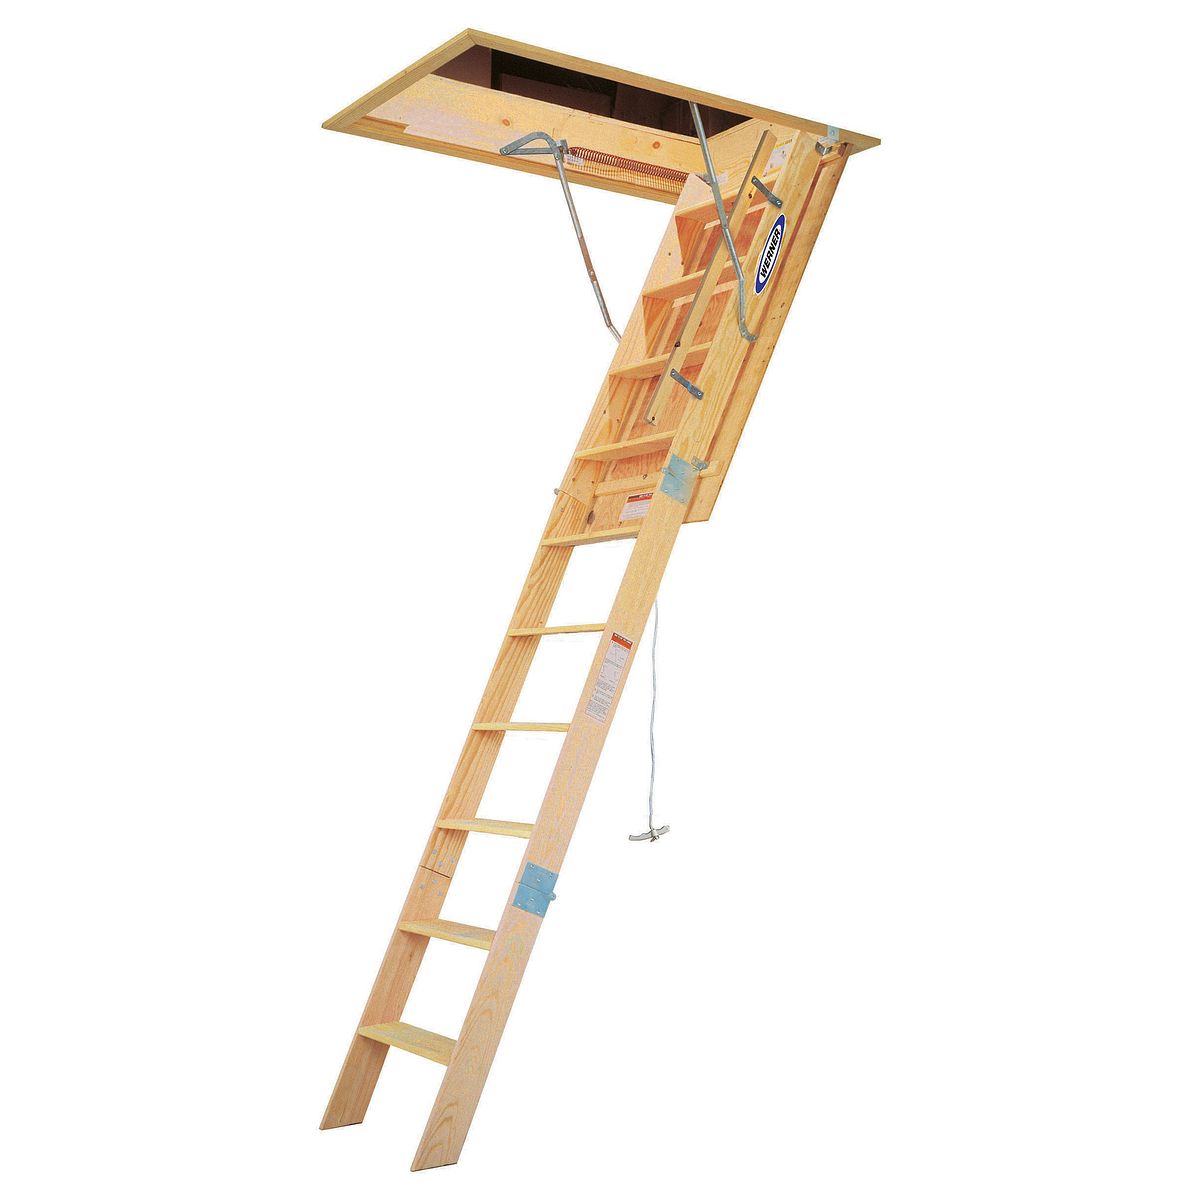 Wh3010 Attic Ladders Werner Us